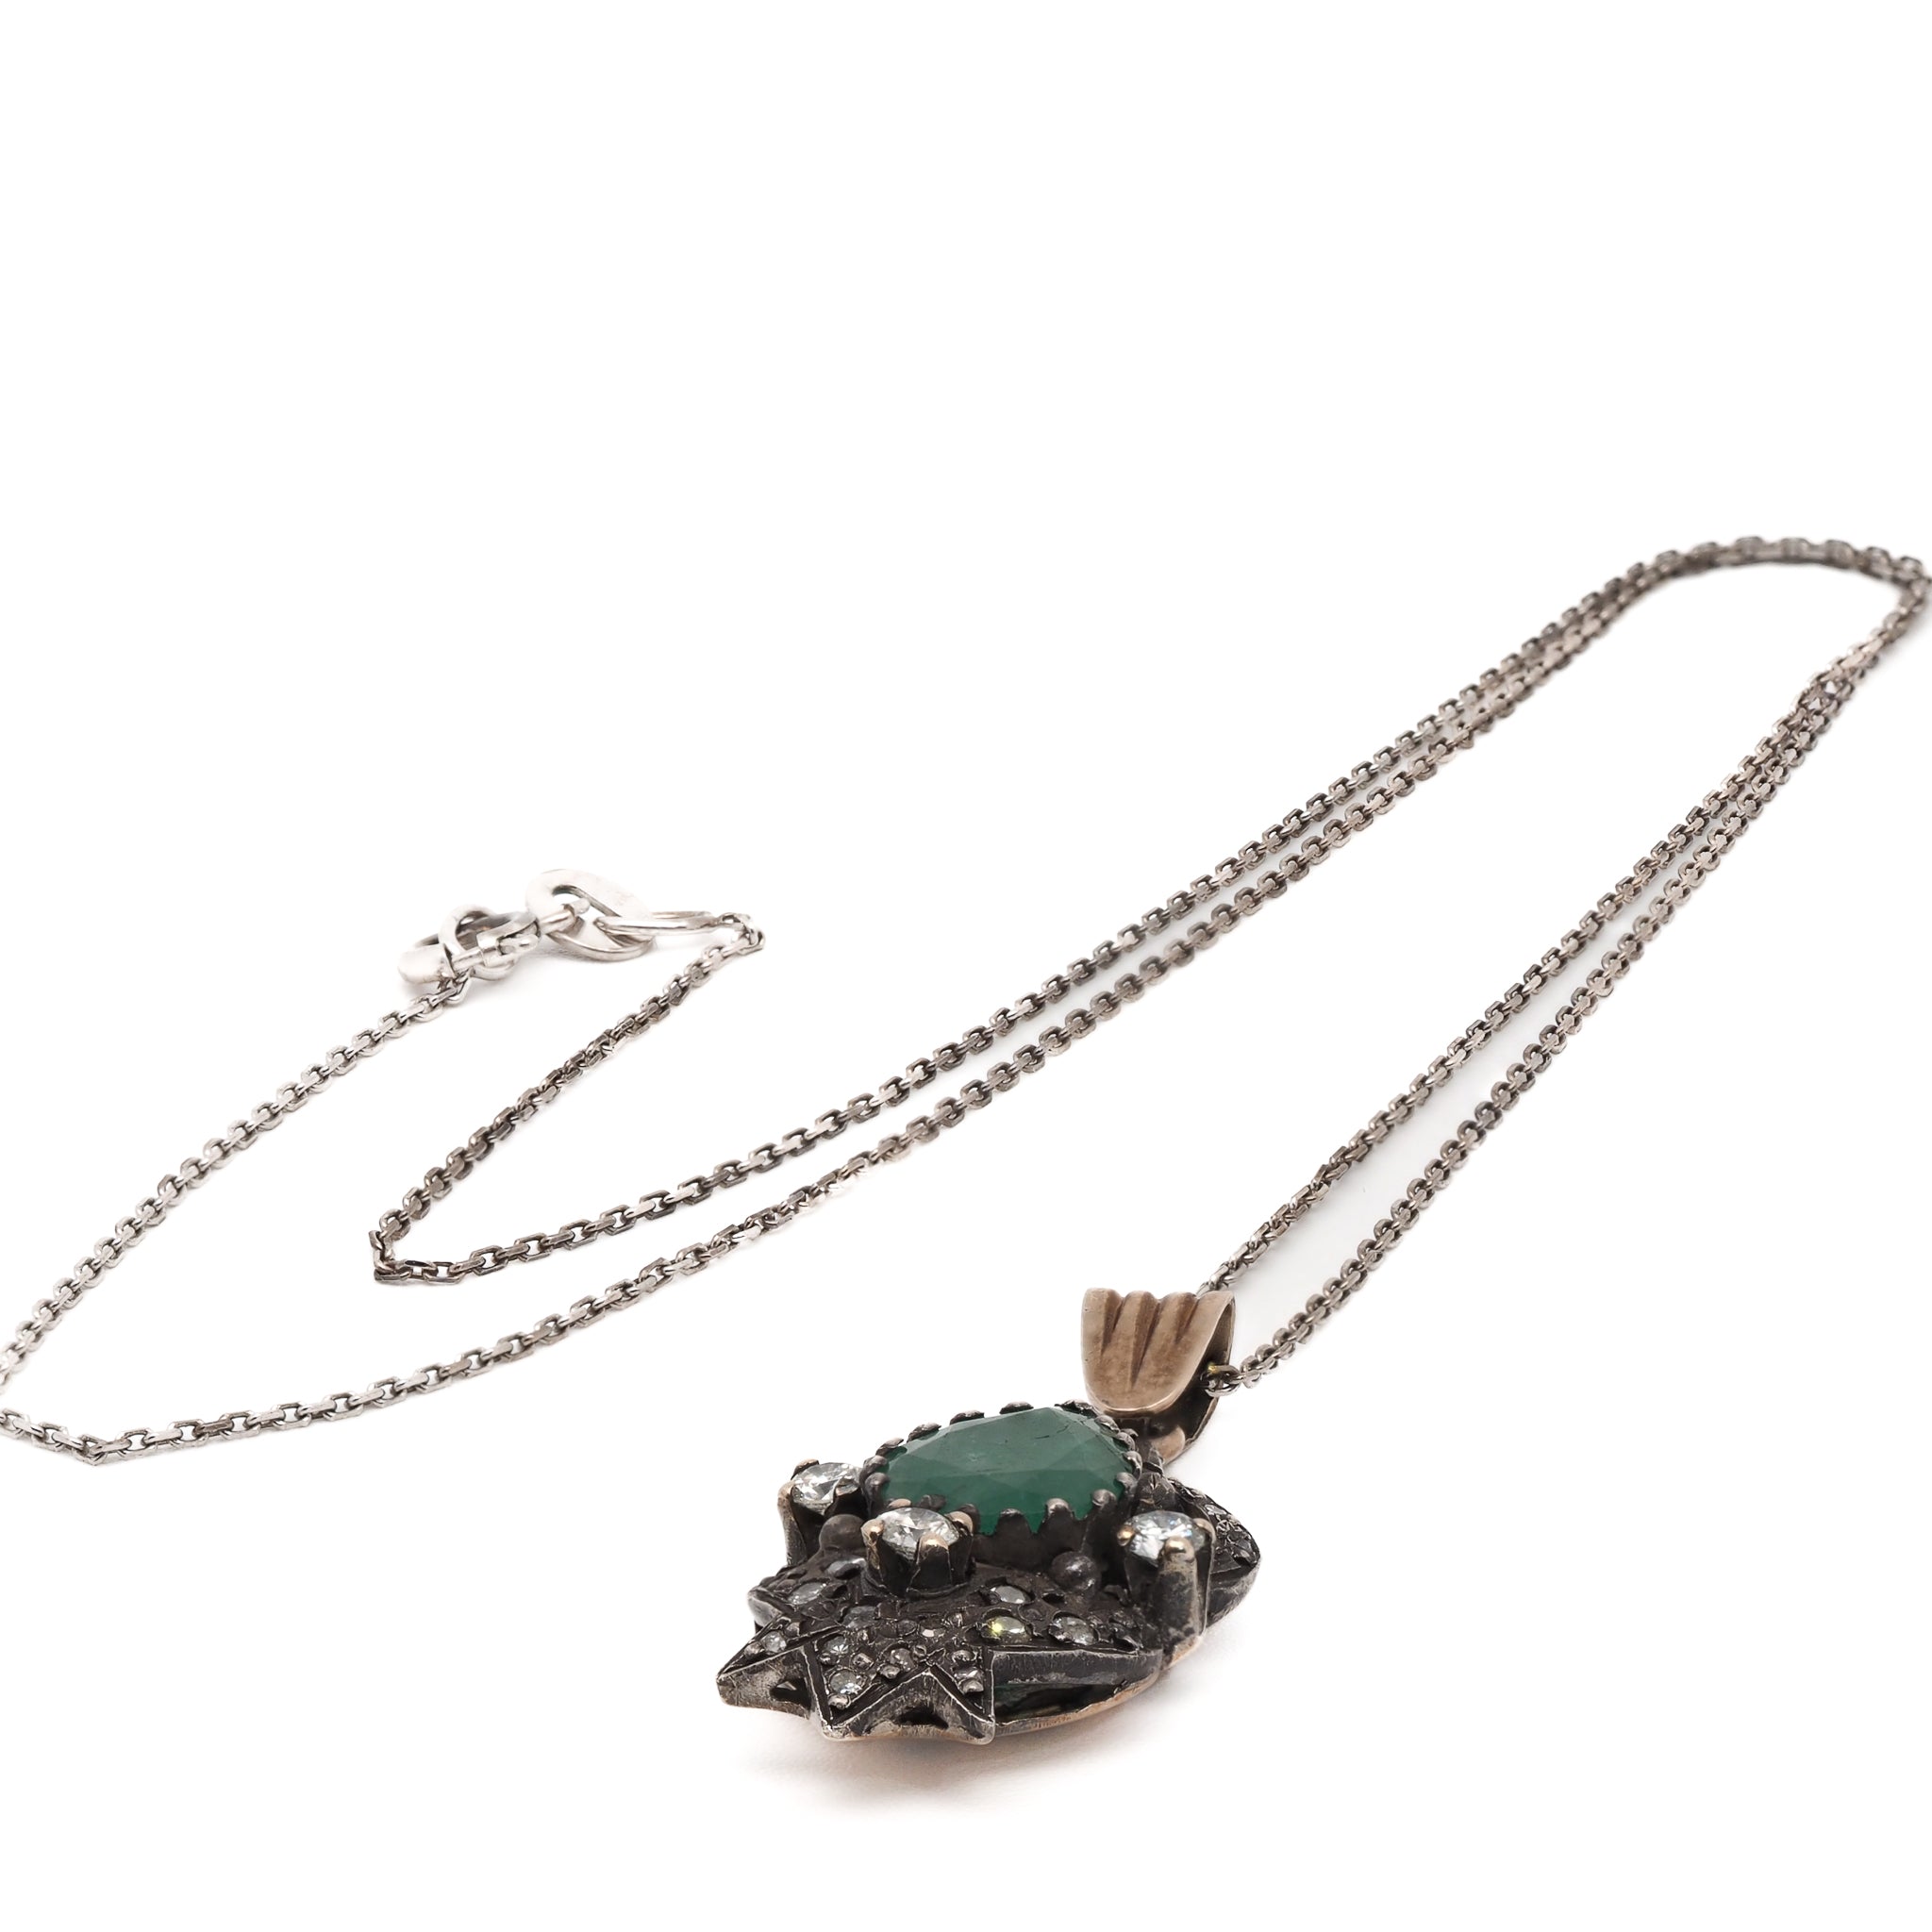 Timeless Beauty - The natural emerald and diamonds exude elegance and charm.